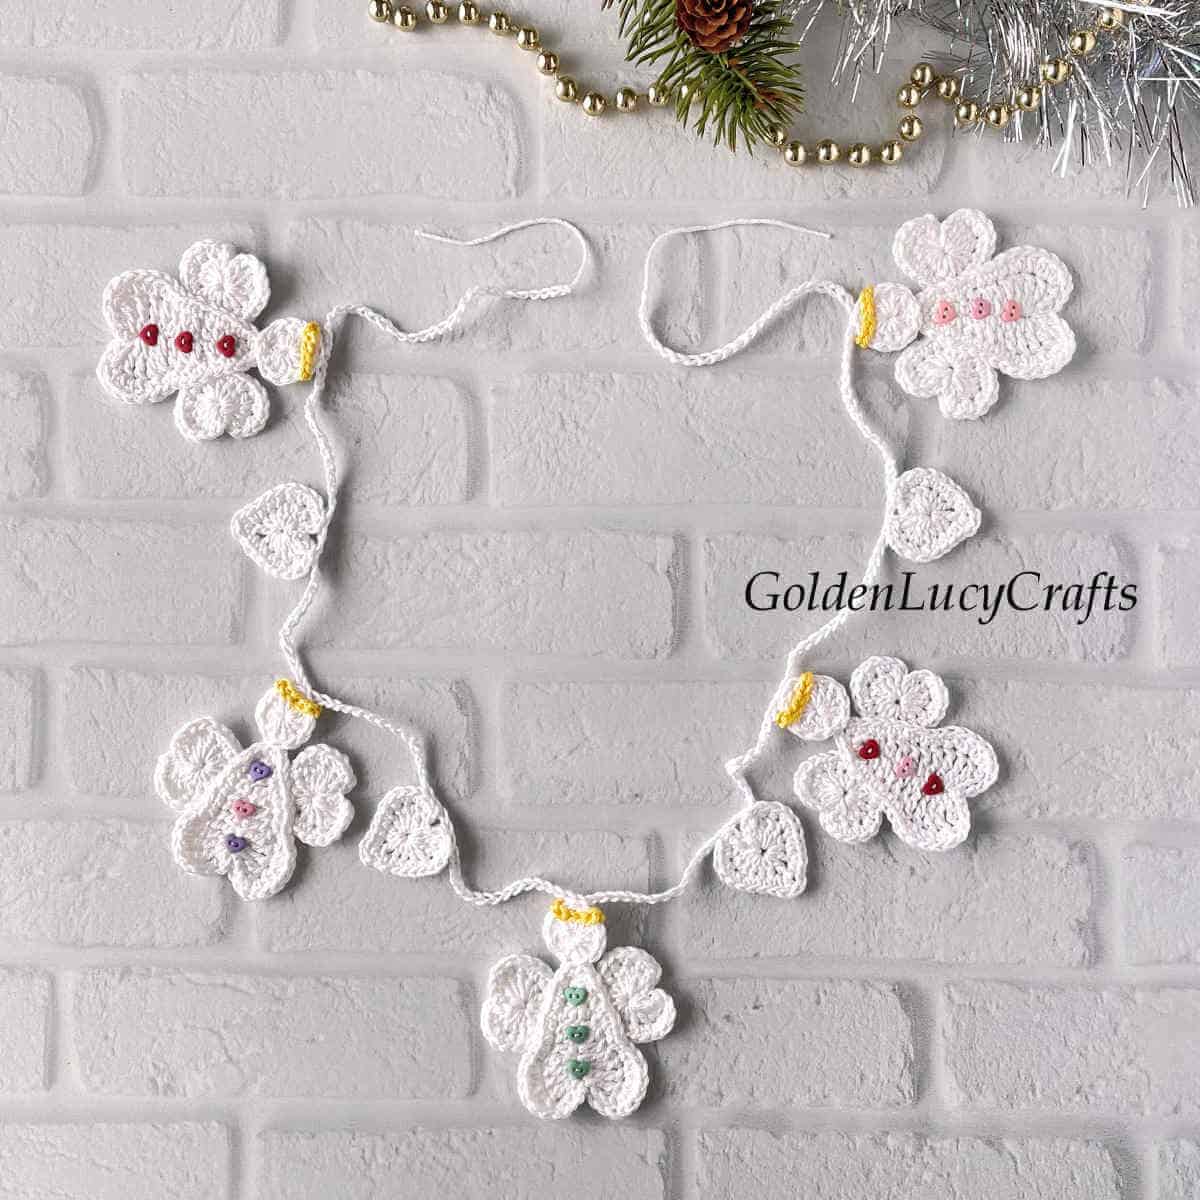 Crocheted Christmas garland with angels and hearts.